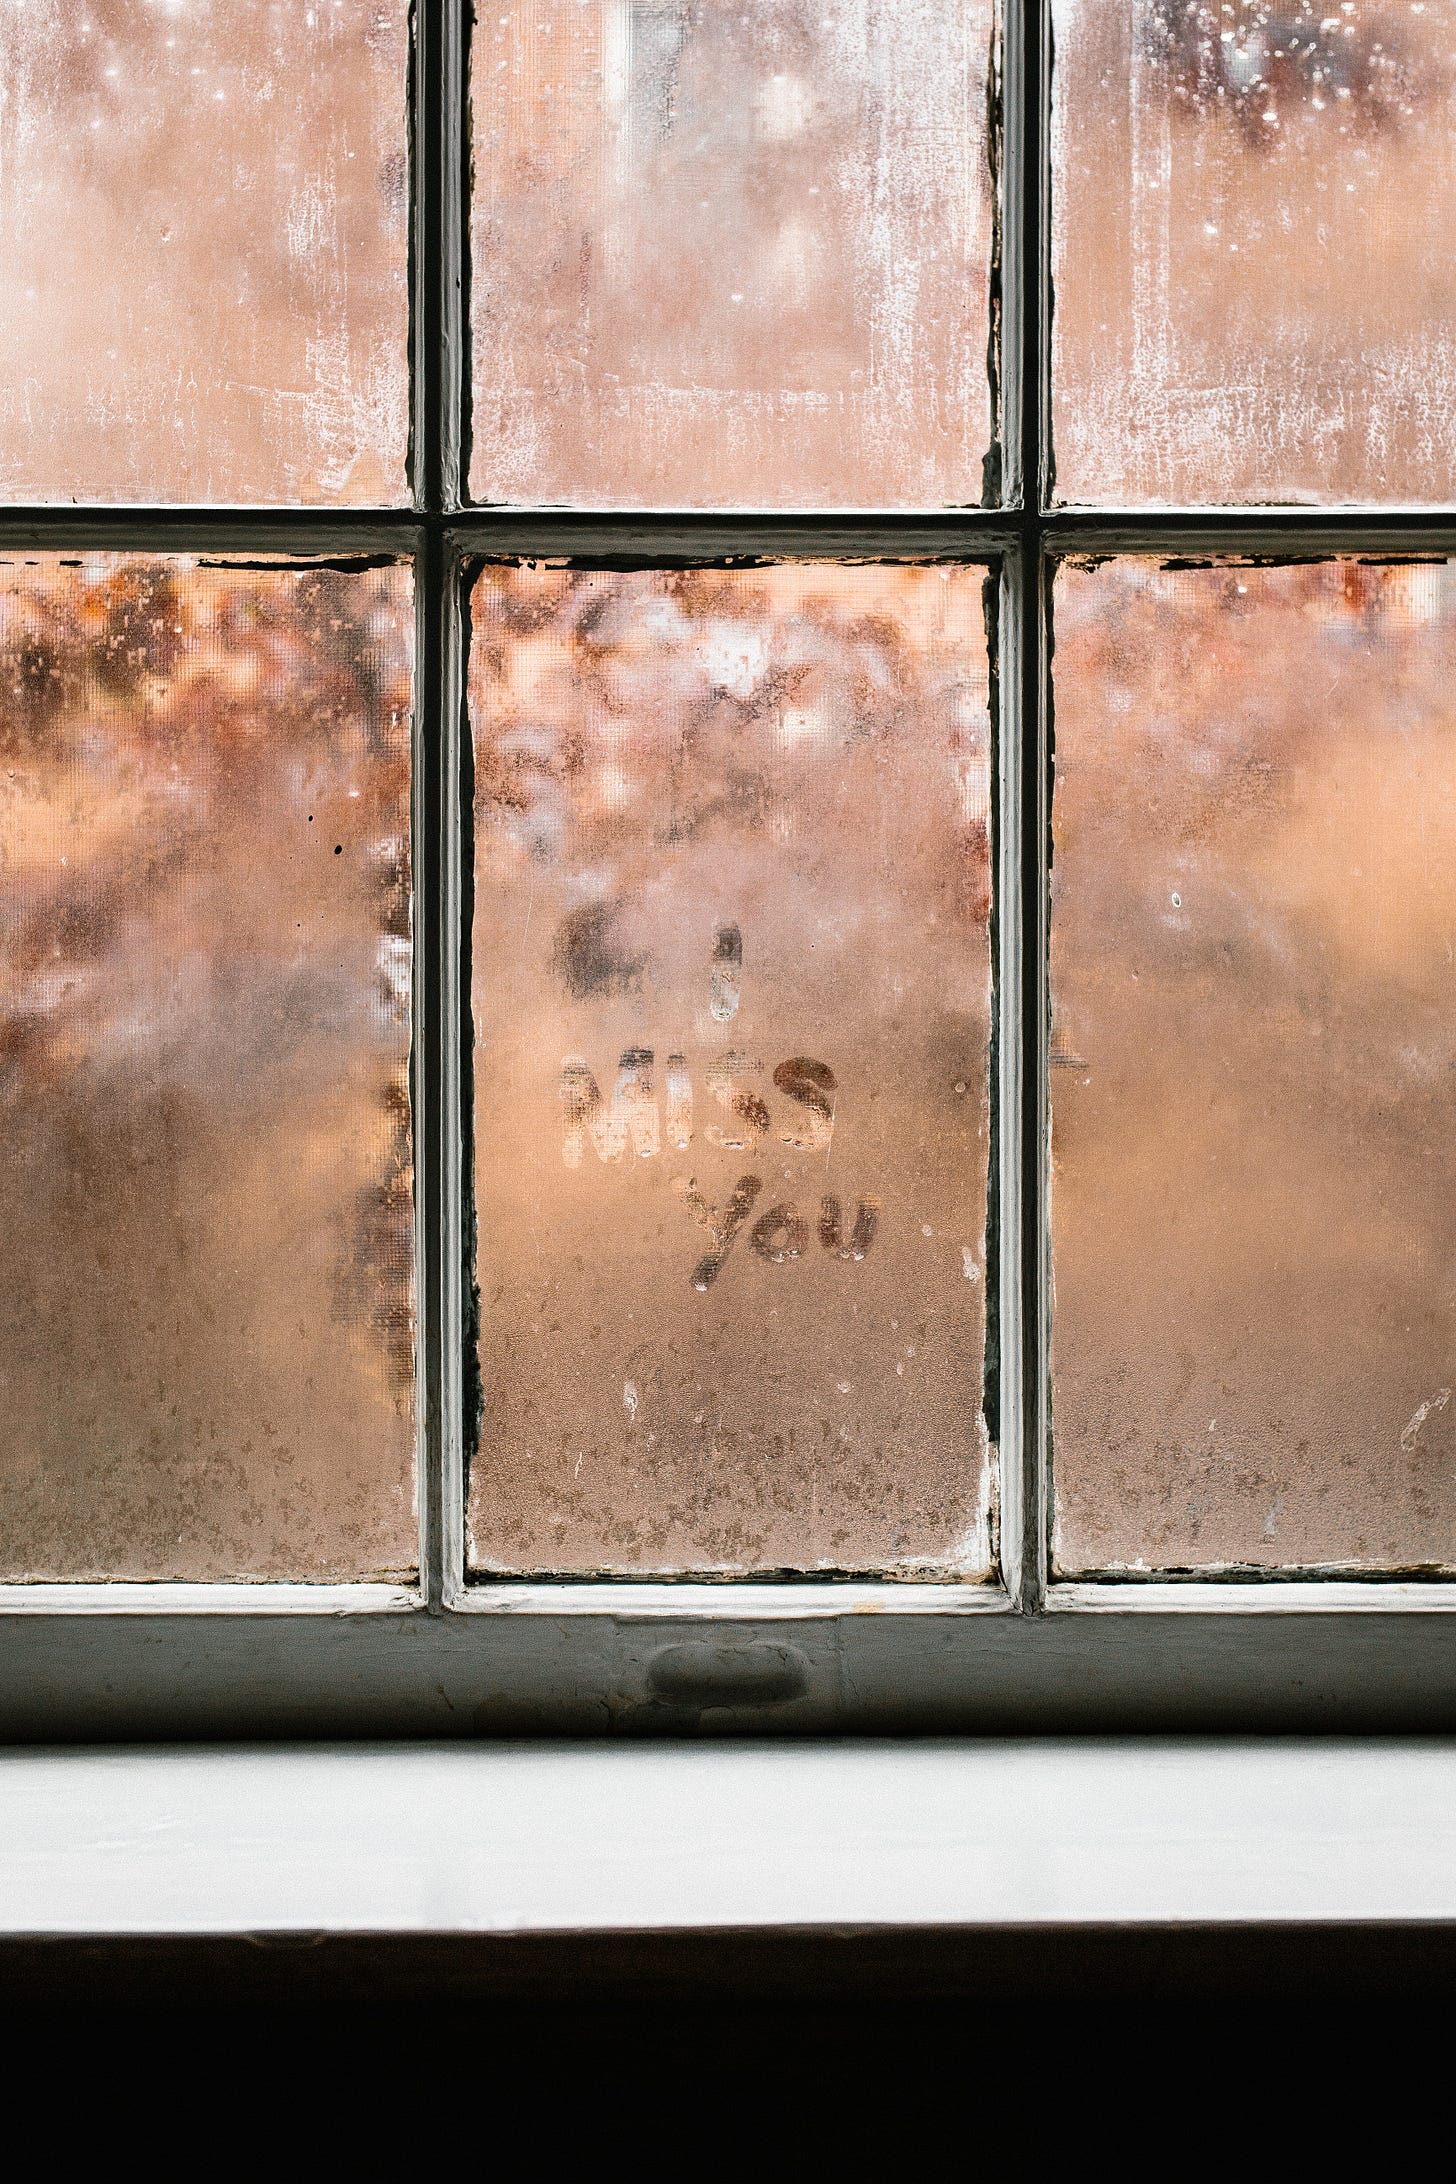 Water condensation on window panes with the words "I miss you" traced in the condensation.